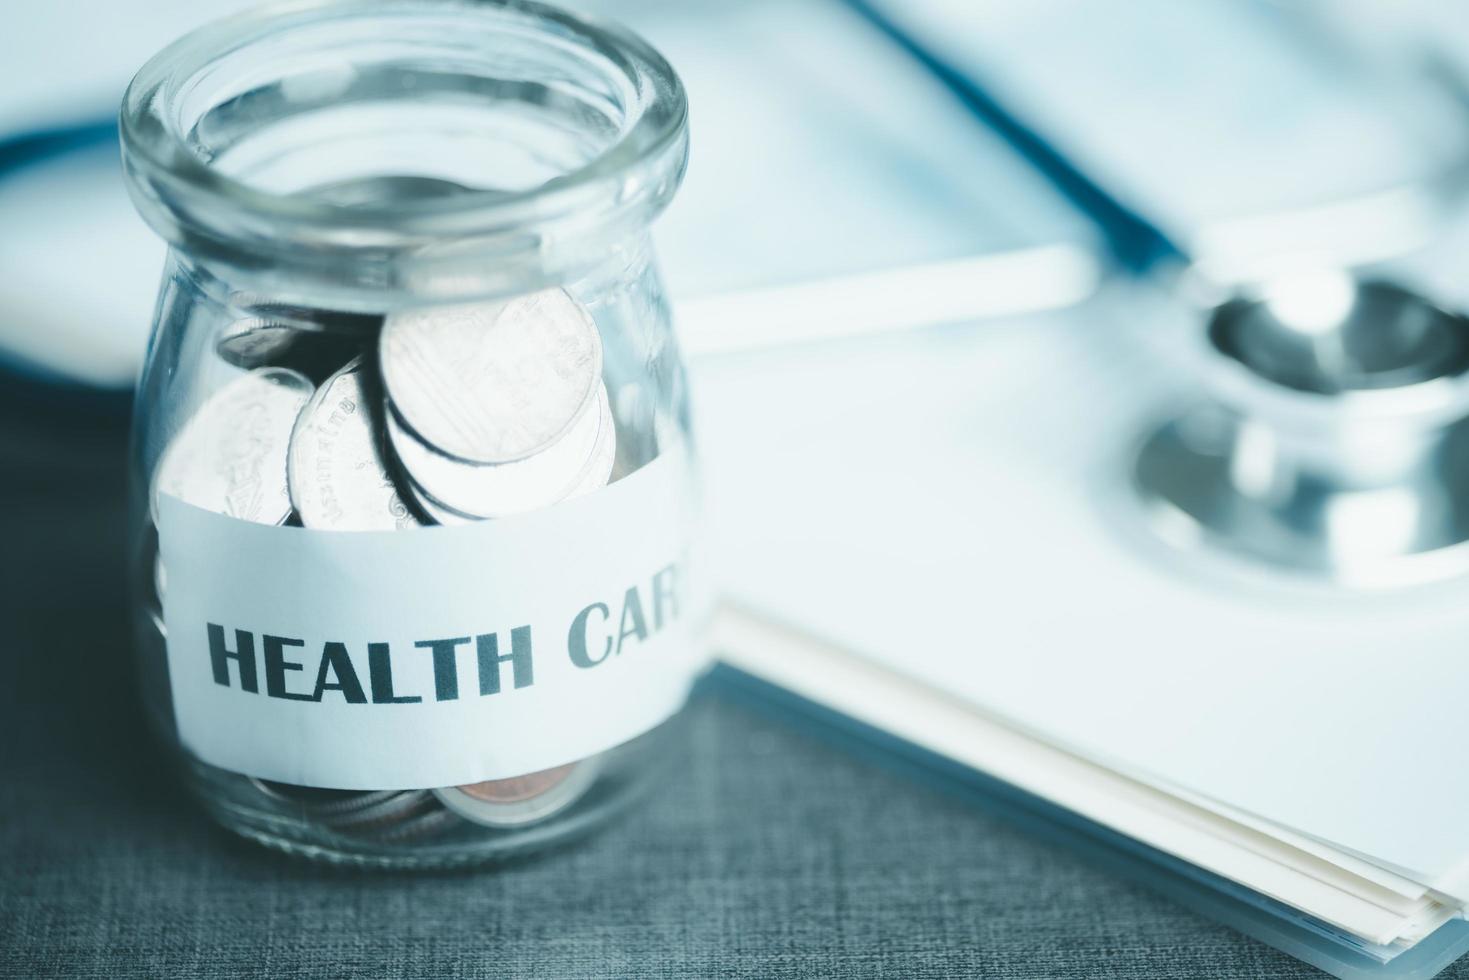 message on paper and coins in glass jar, stethoscope and medical report, all on table, savings concept, for health care expenses, financial health check, control financial risks, insurance investments photo